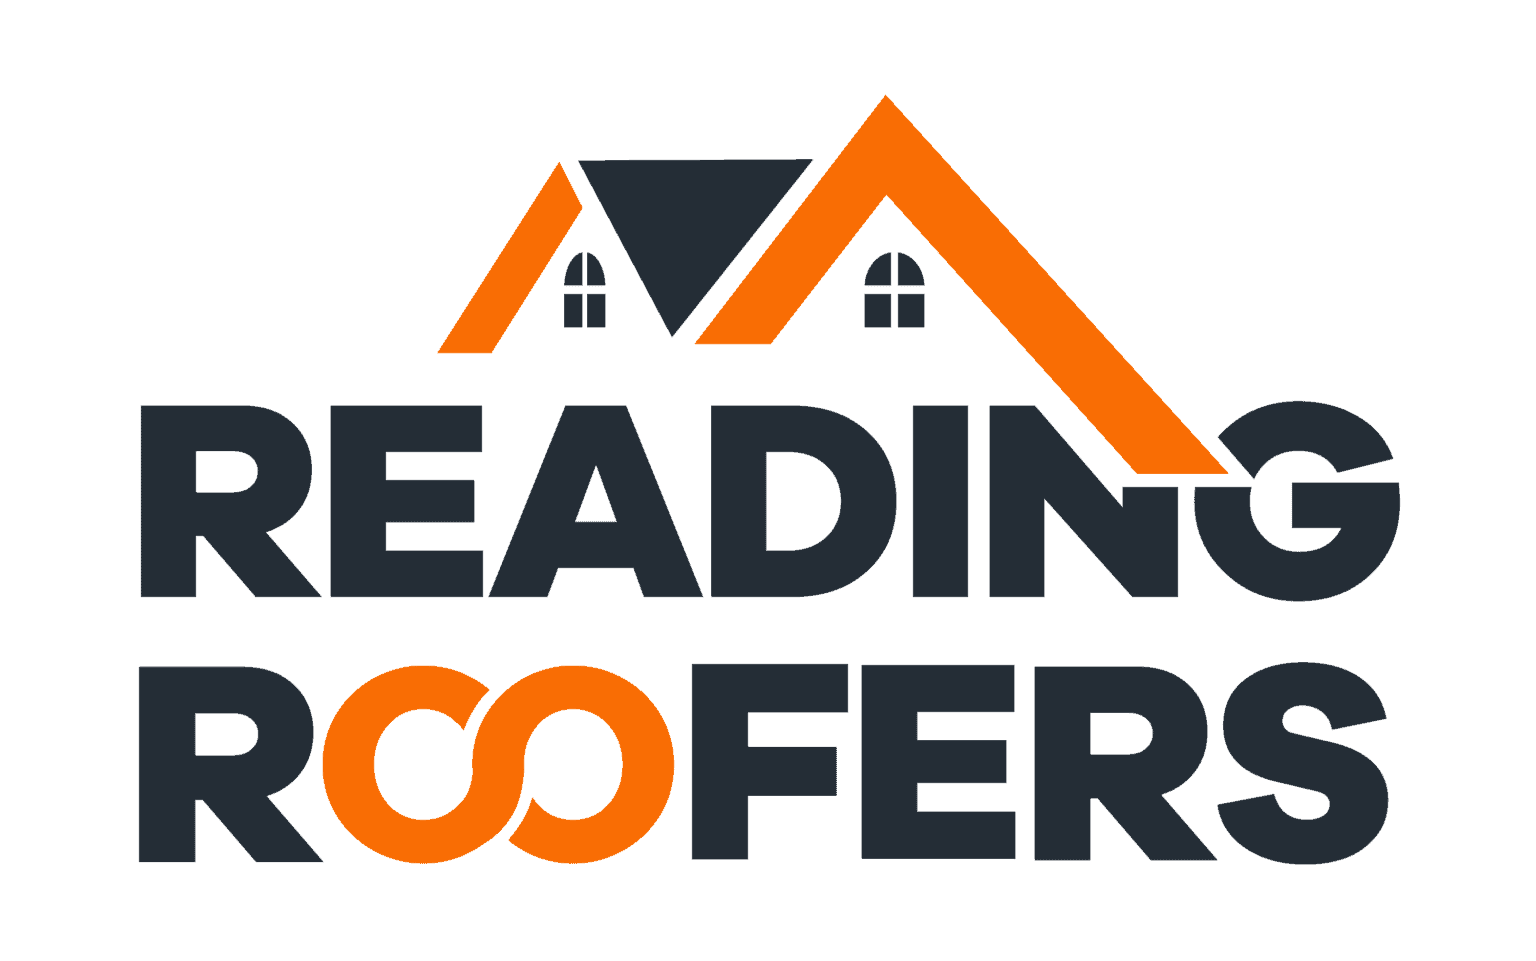 Reading Roofers logo